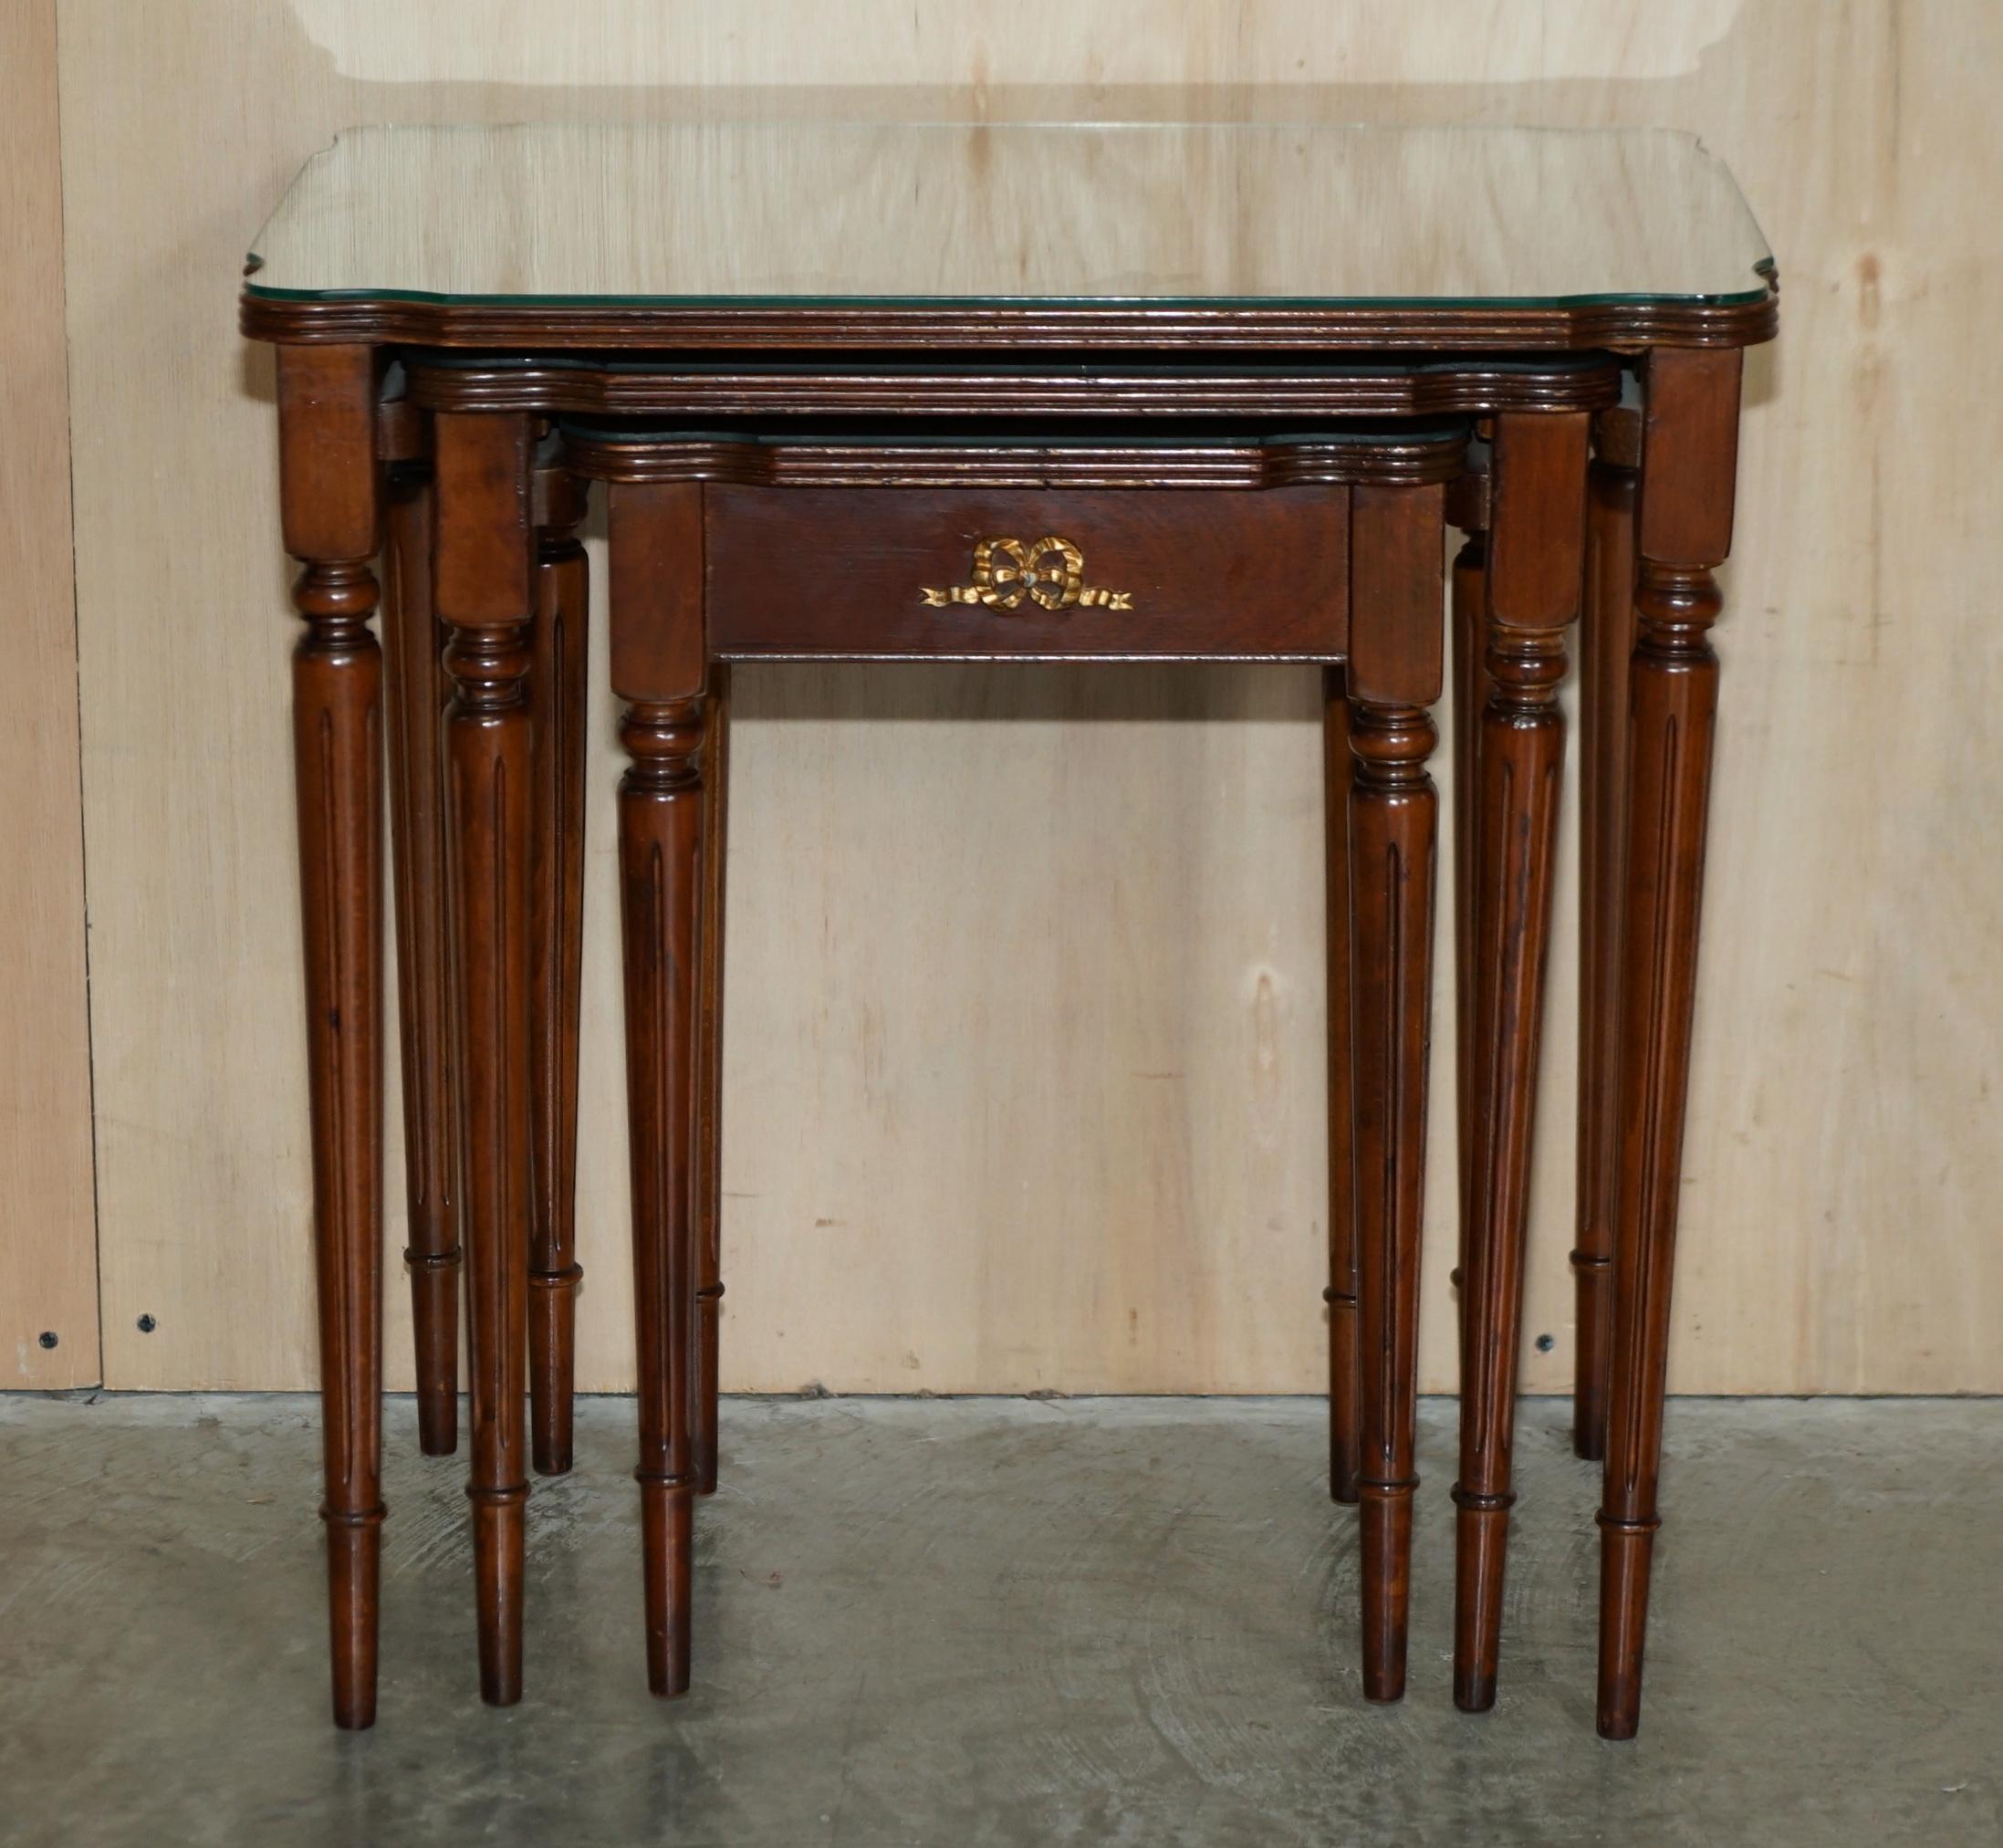 We are delighted to offer for sale this lovely nest of three French Empire tables which have flamed mahogany tops protected by glass inserts and finished with gilt brass mounts 

A very good looking and well made nest, the timber patina to the top